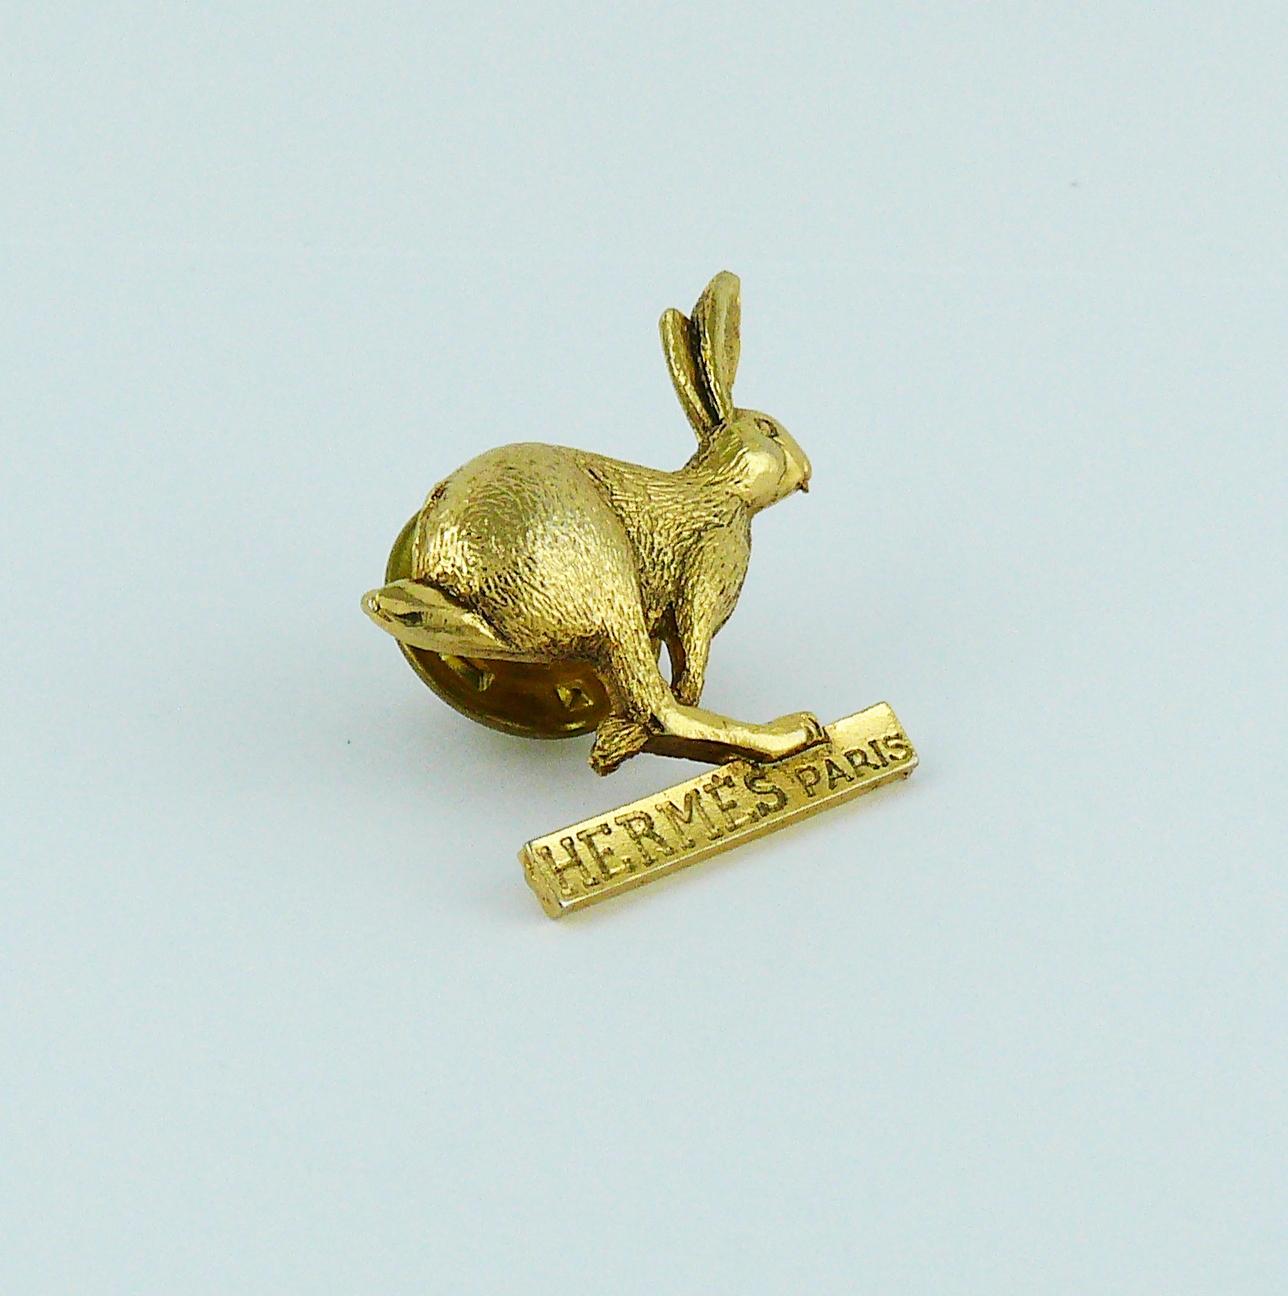 HERMES Paris rare collector gold toned hare pin.

Embossed HERMES Paris at the front.

Indicative measurements : max. approx. 2.3 cm (0.91 inch) x 2.3 cm (0.91 inch).

JEWELRY CONDITION CHART
- New or never worn : item is in pristine condition with